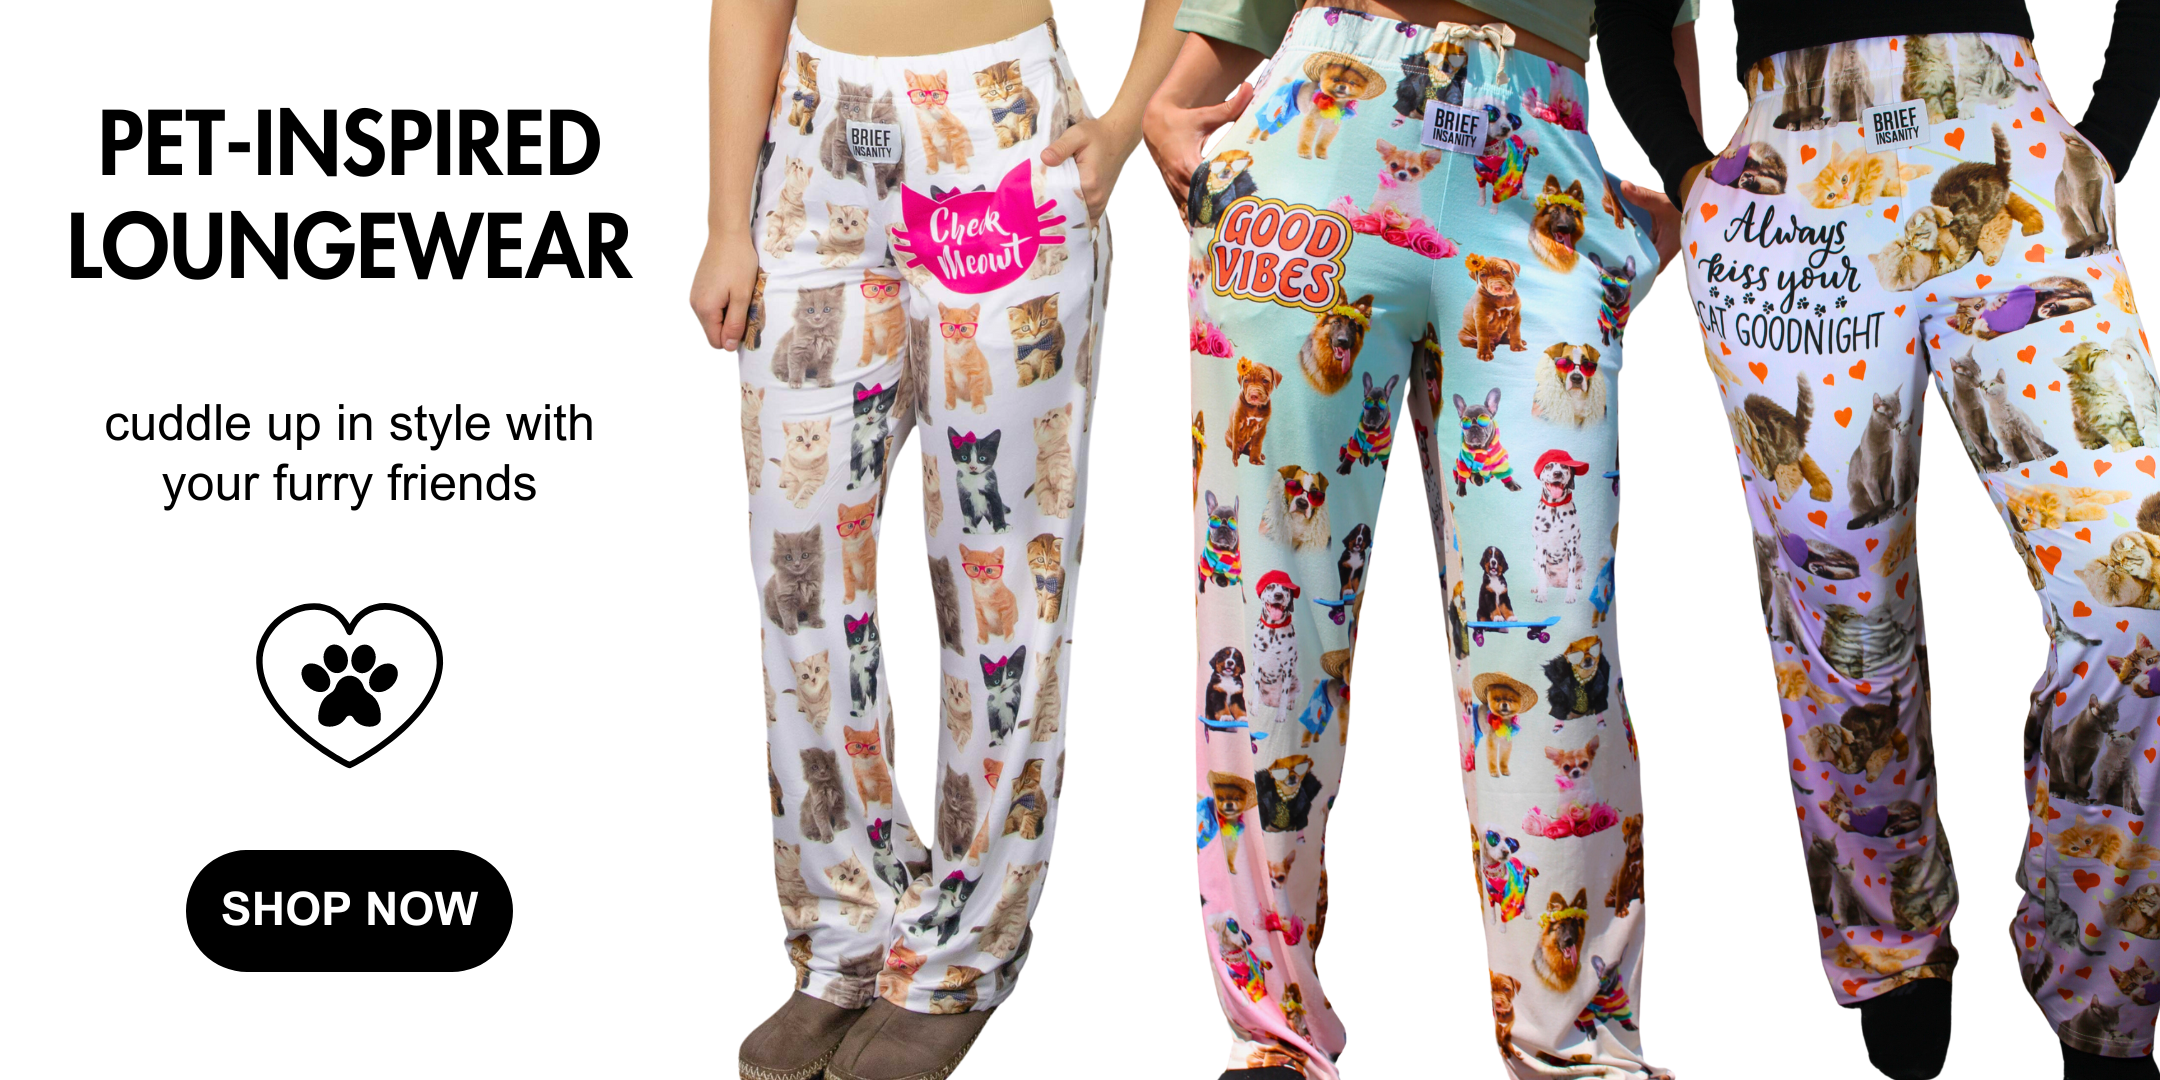 Pet-Inspired Loungewear, cuddle up in style with your furry friends, shop now